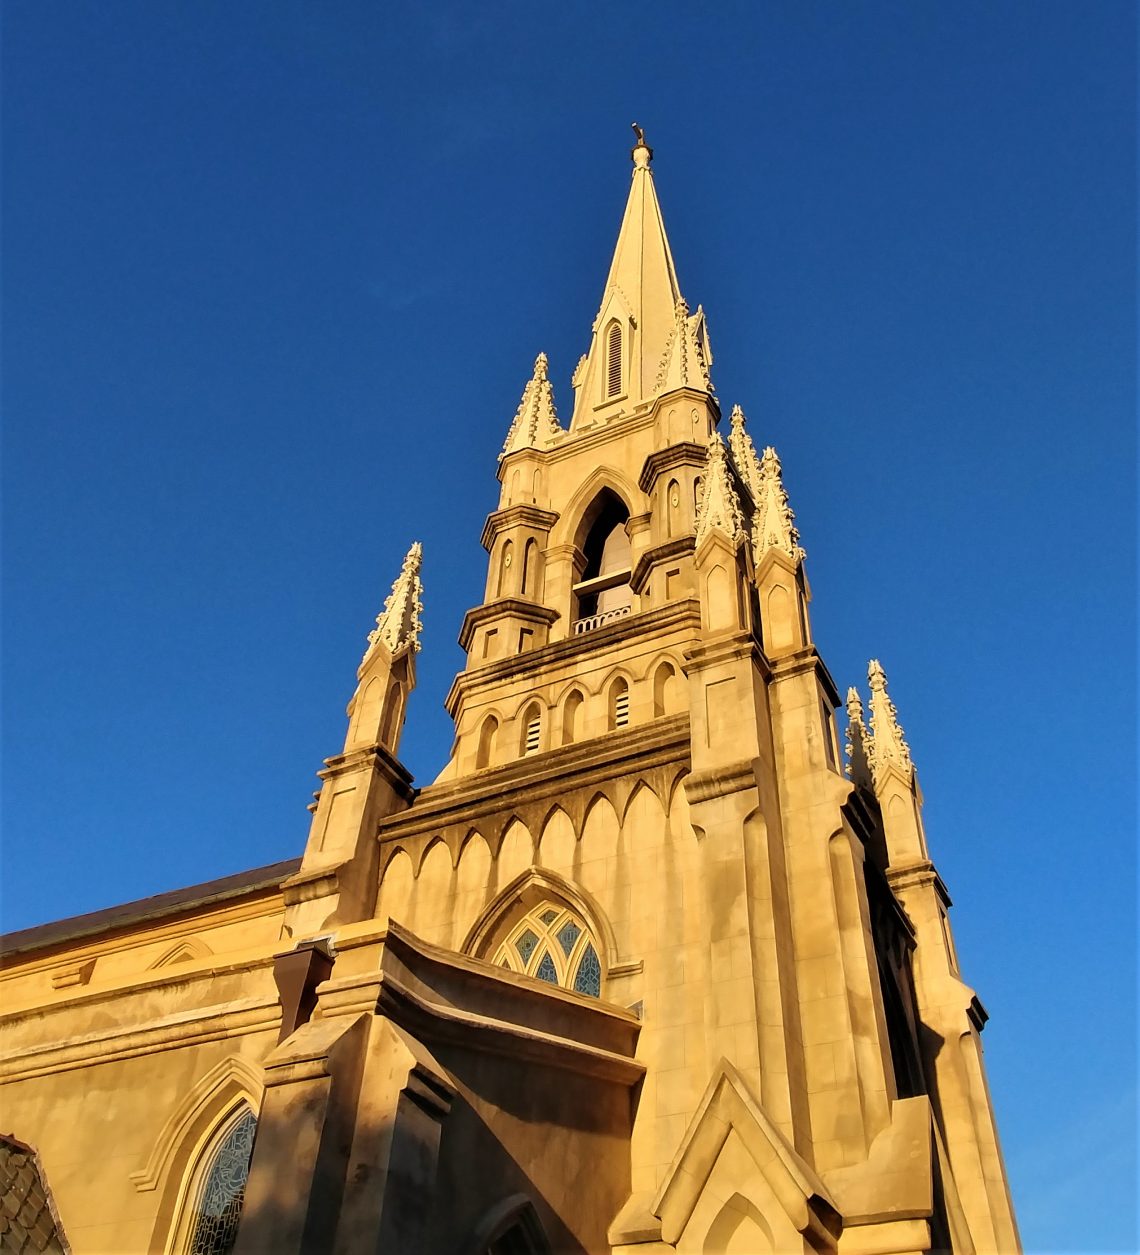 Grace Church Cathedral, located on Wentworth Street, is one of the most striking in Charleston. Designed by the famed architect, Edward Brickell White, it opened in 1848.